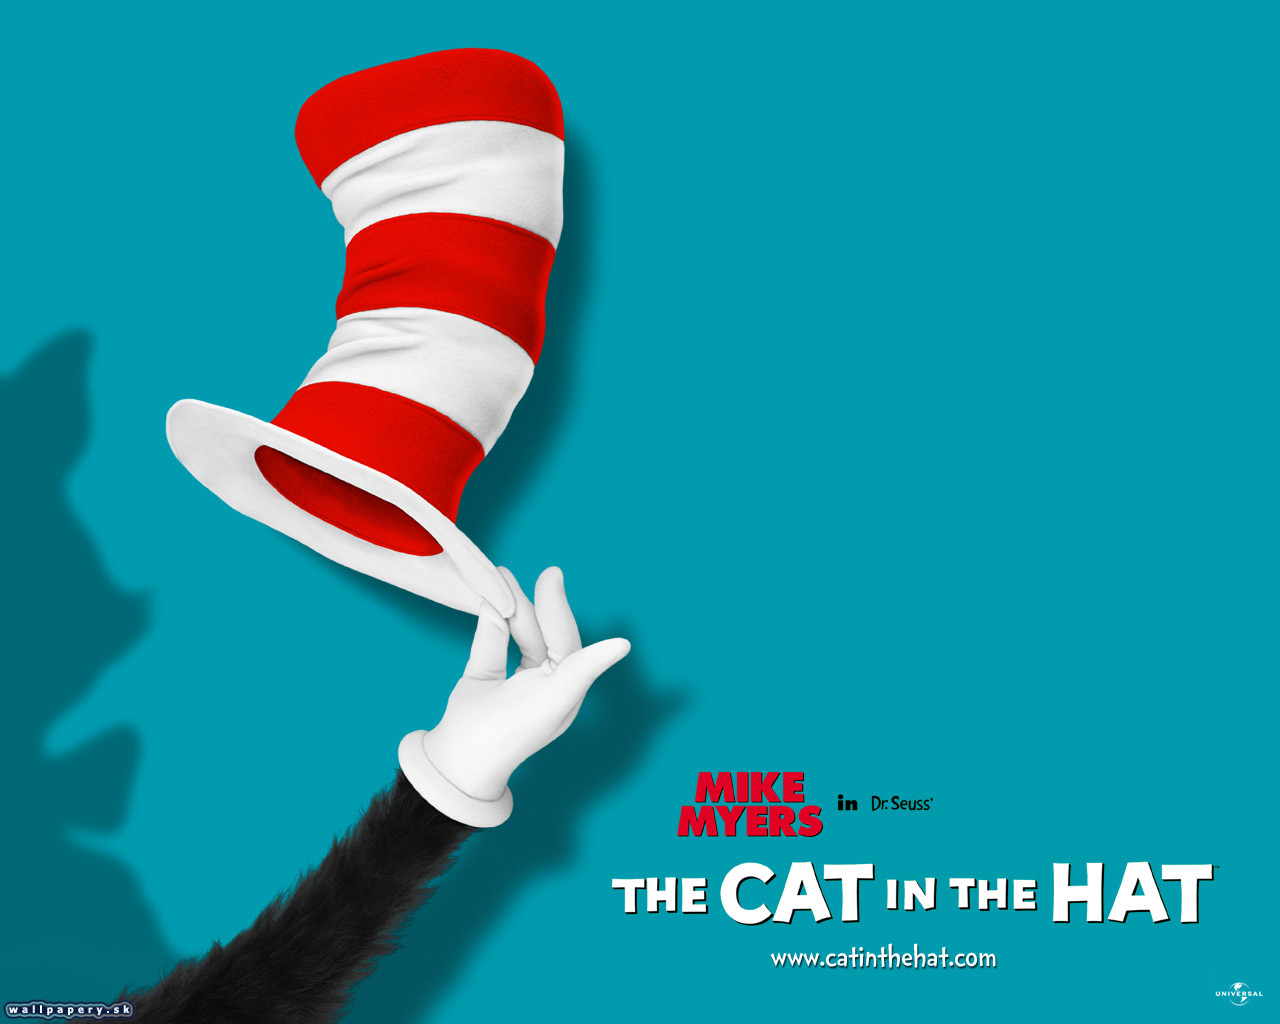 The Cat in the Hat - wallpaper 5